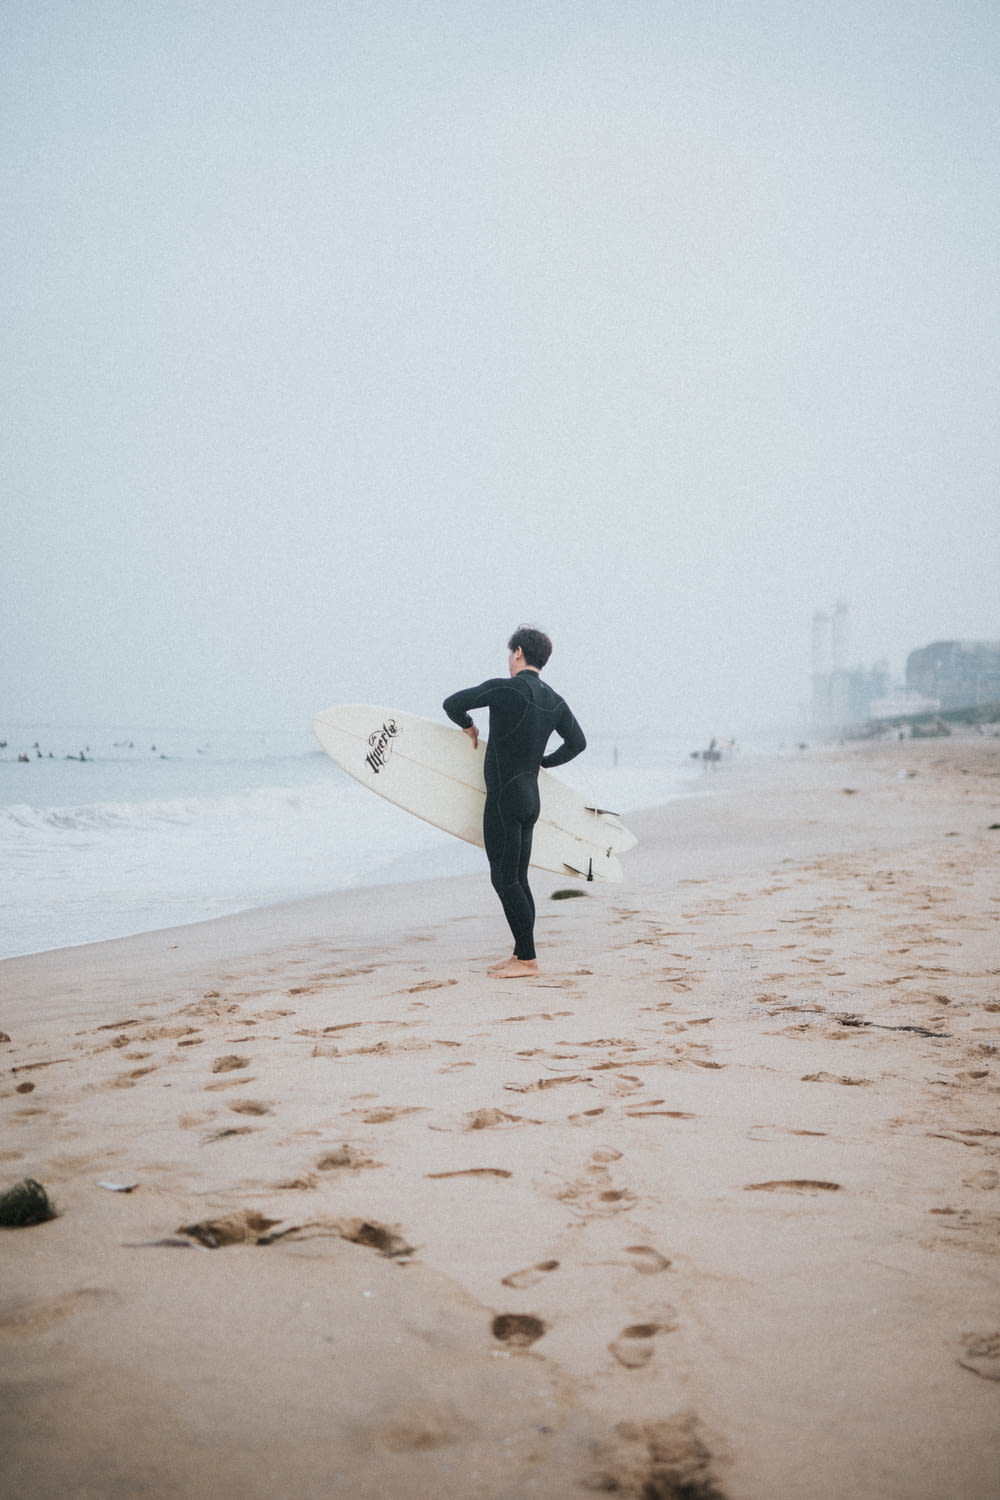 a man in a wet suit holding a surfboard on a beach